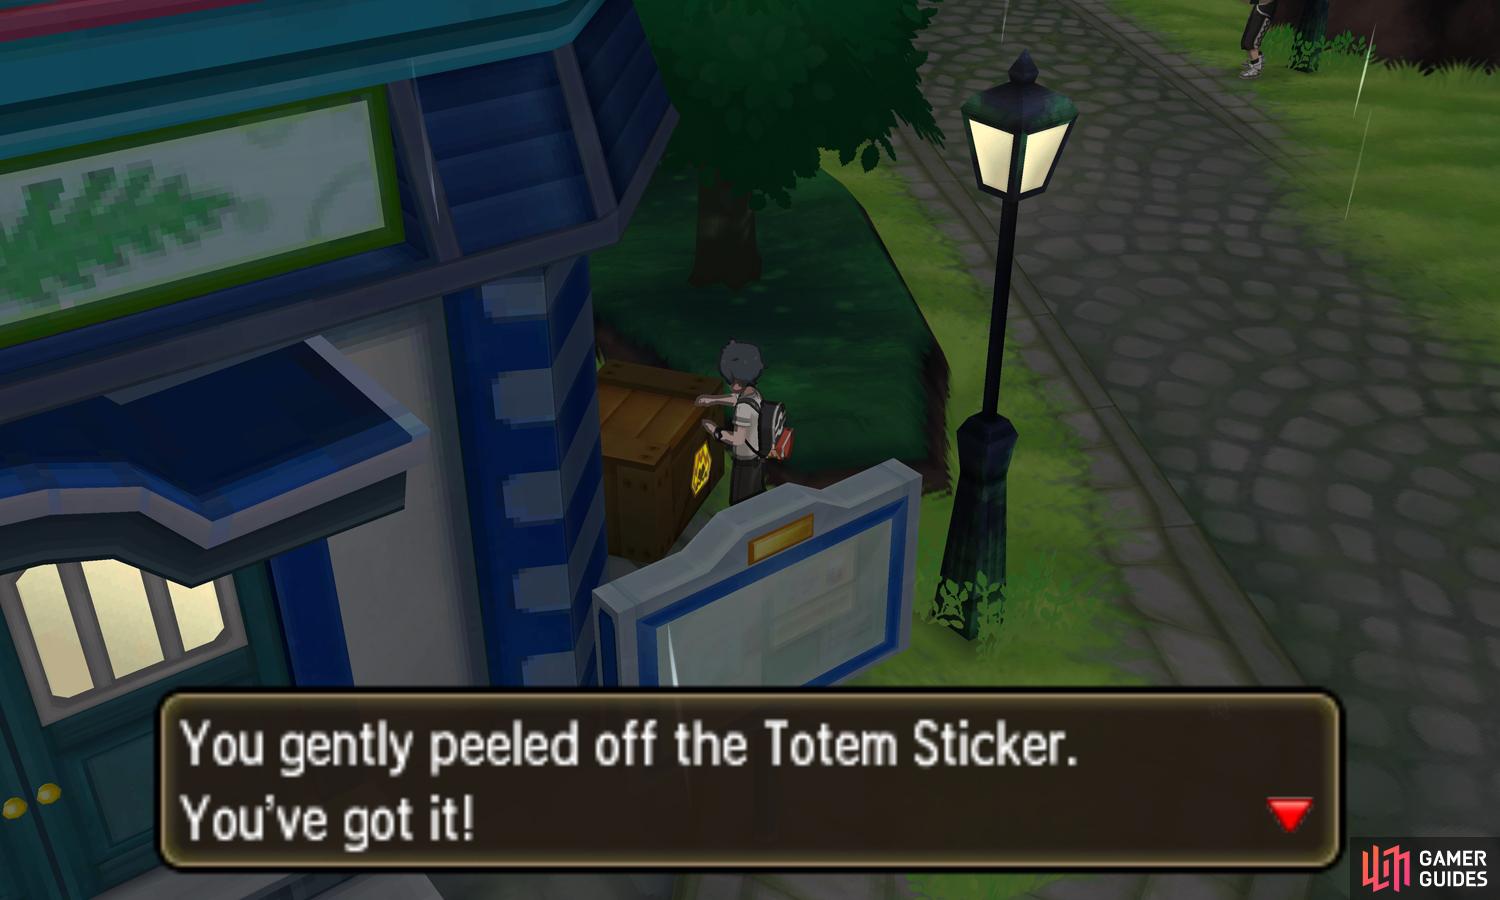 You'd better grab those stickers before Team Skull notices them!